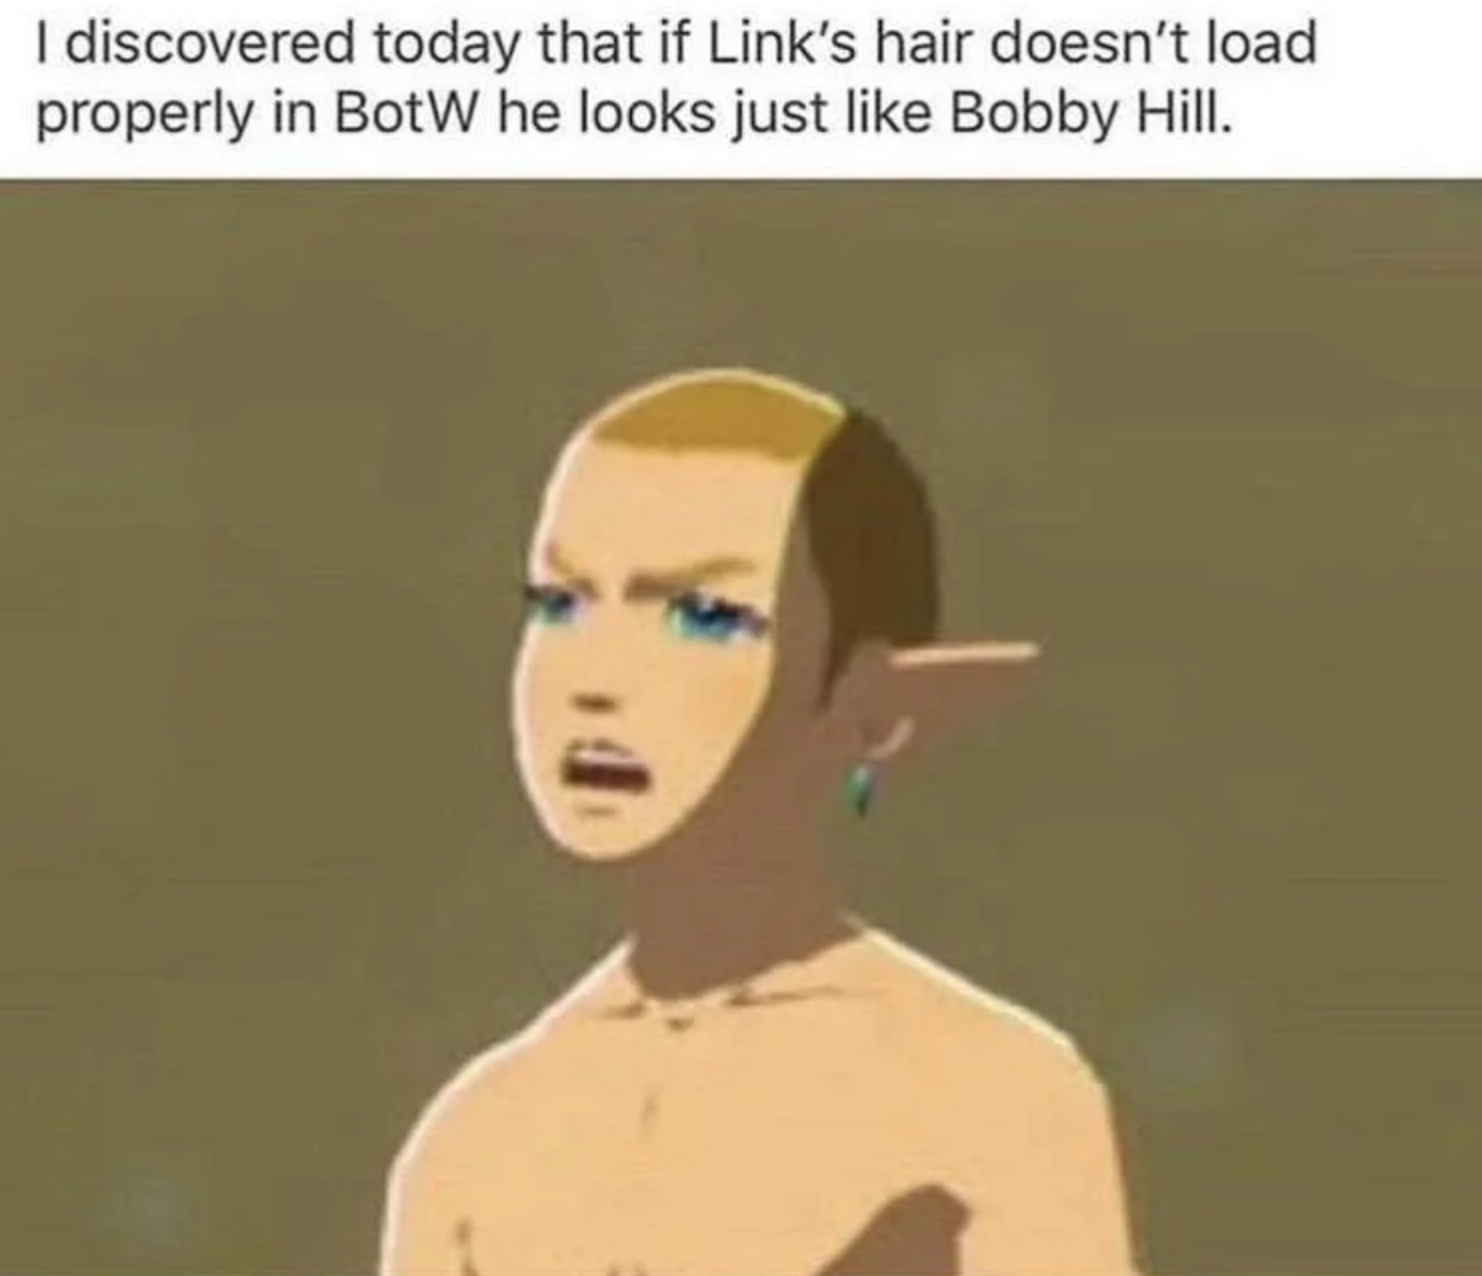 funny gaming memes - that's my purse i don t know you - I discovered today that if Link's hair doesn't load properly in BotW he looks just Bobby Hill.